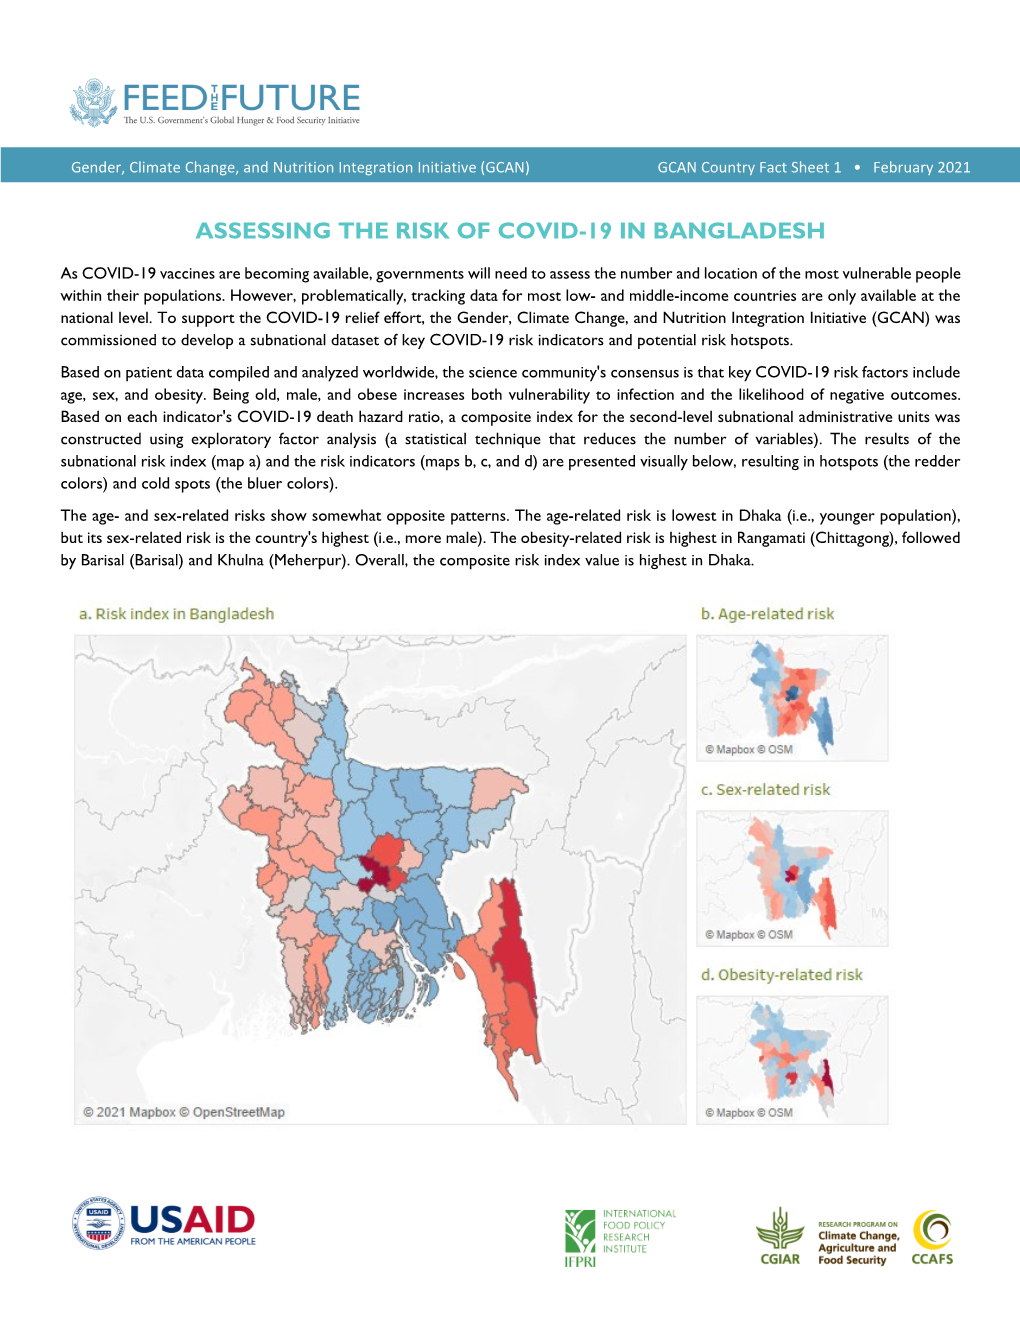 Assessing the Risk of Covid-19 in Bangladesh